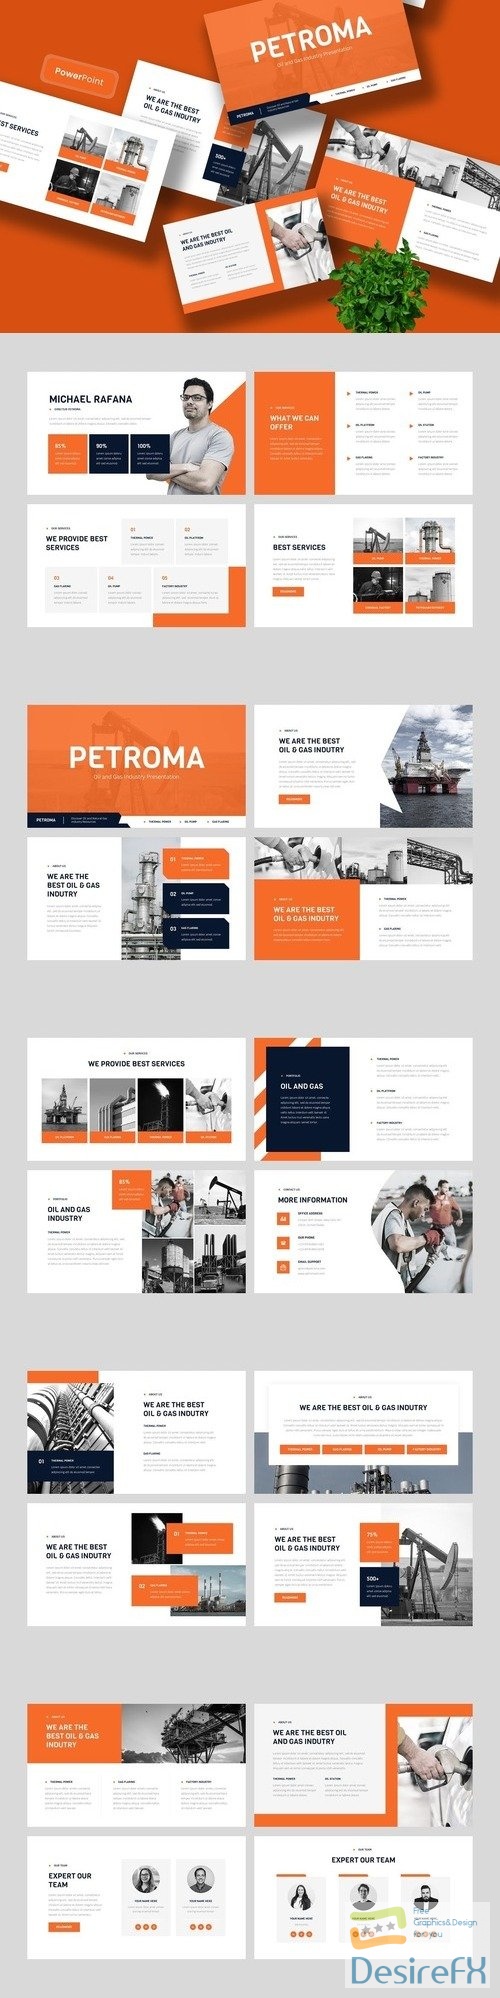 Petroma - Oil & Gas Industry PowerPoint Template